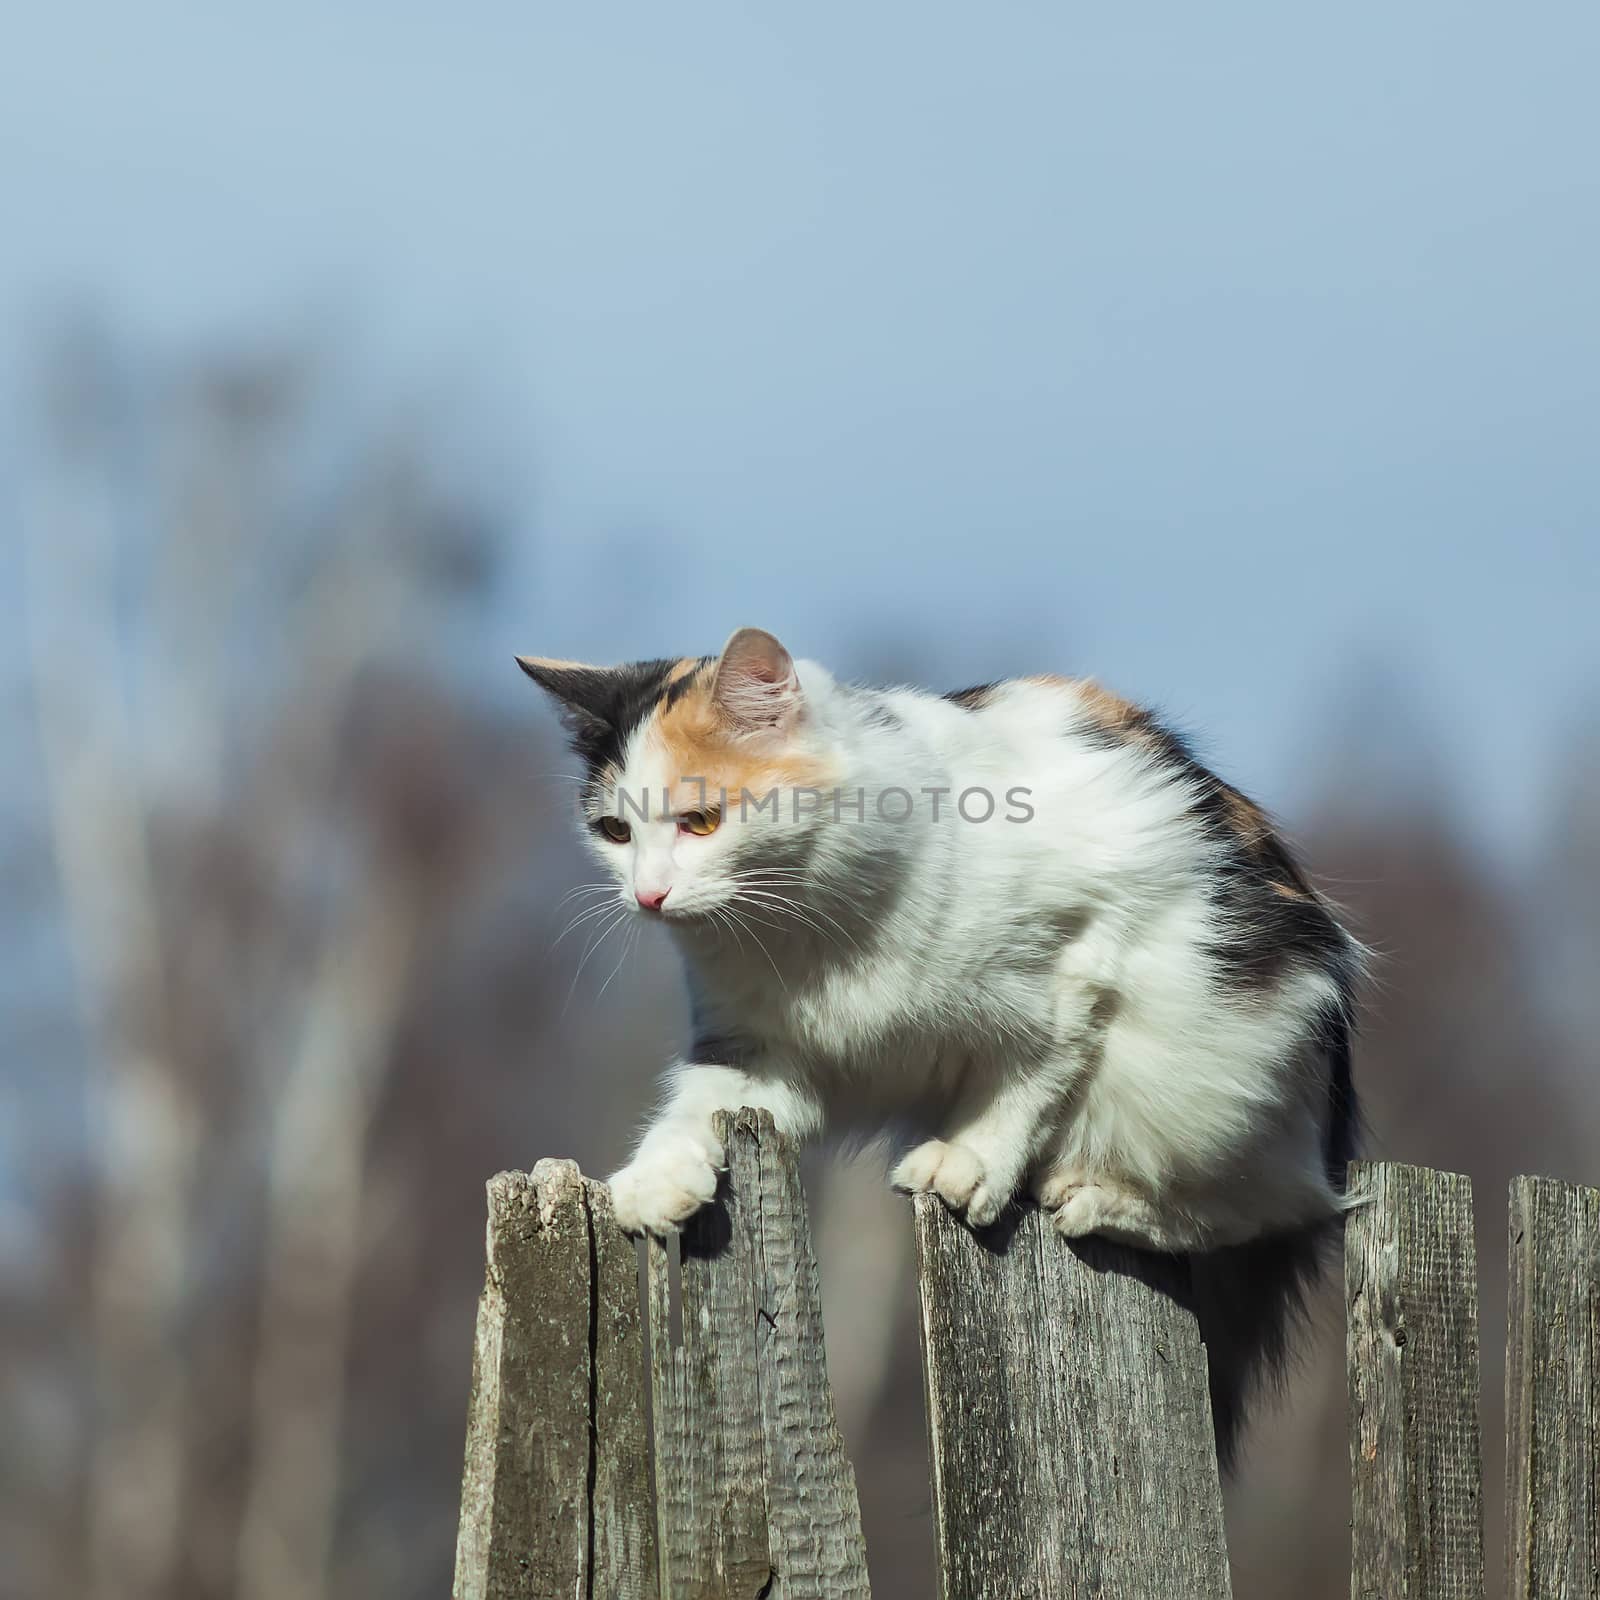 The three-colored cat sits on a fence